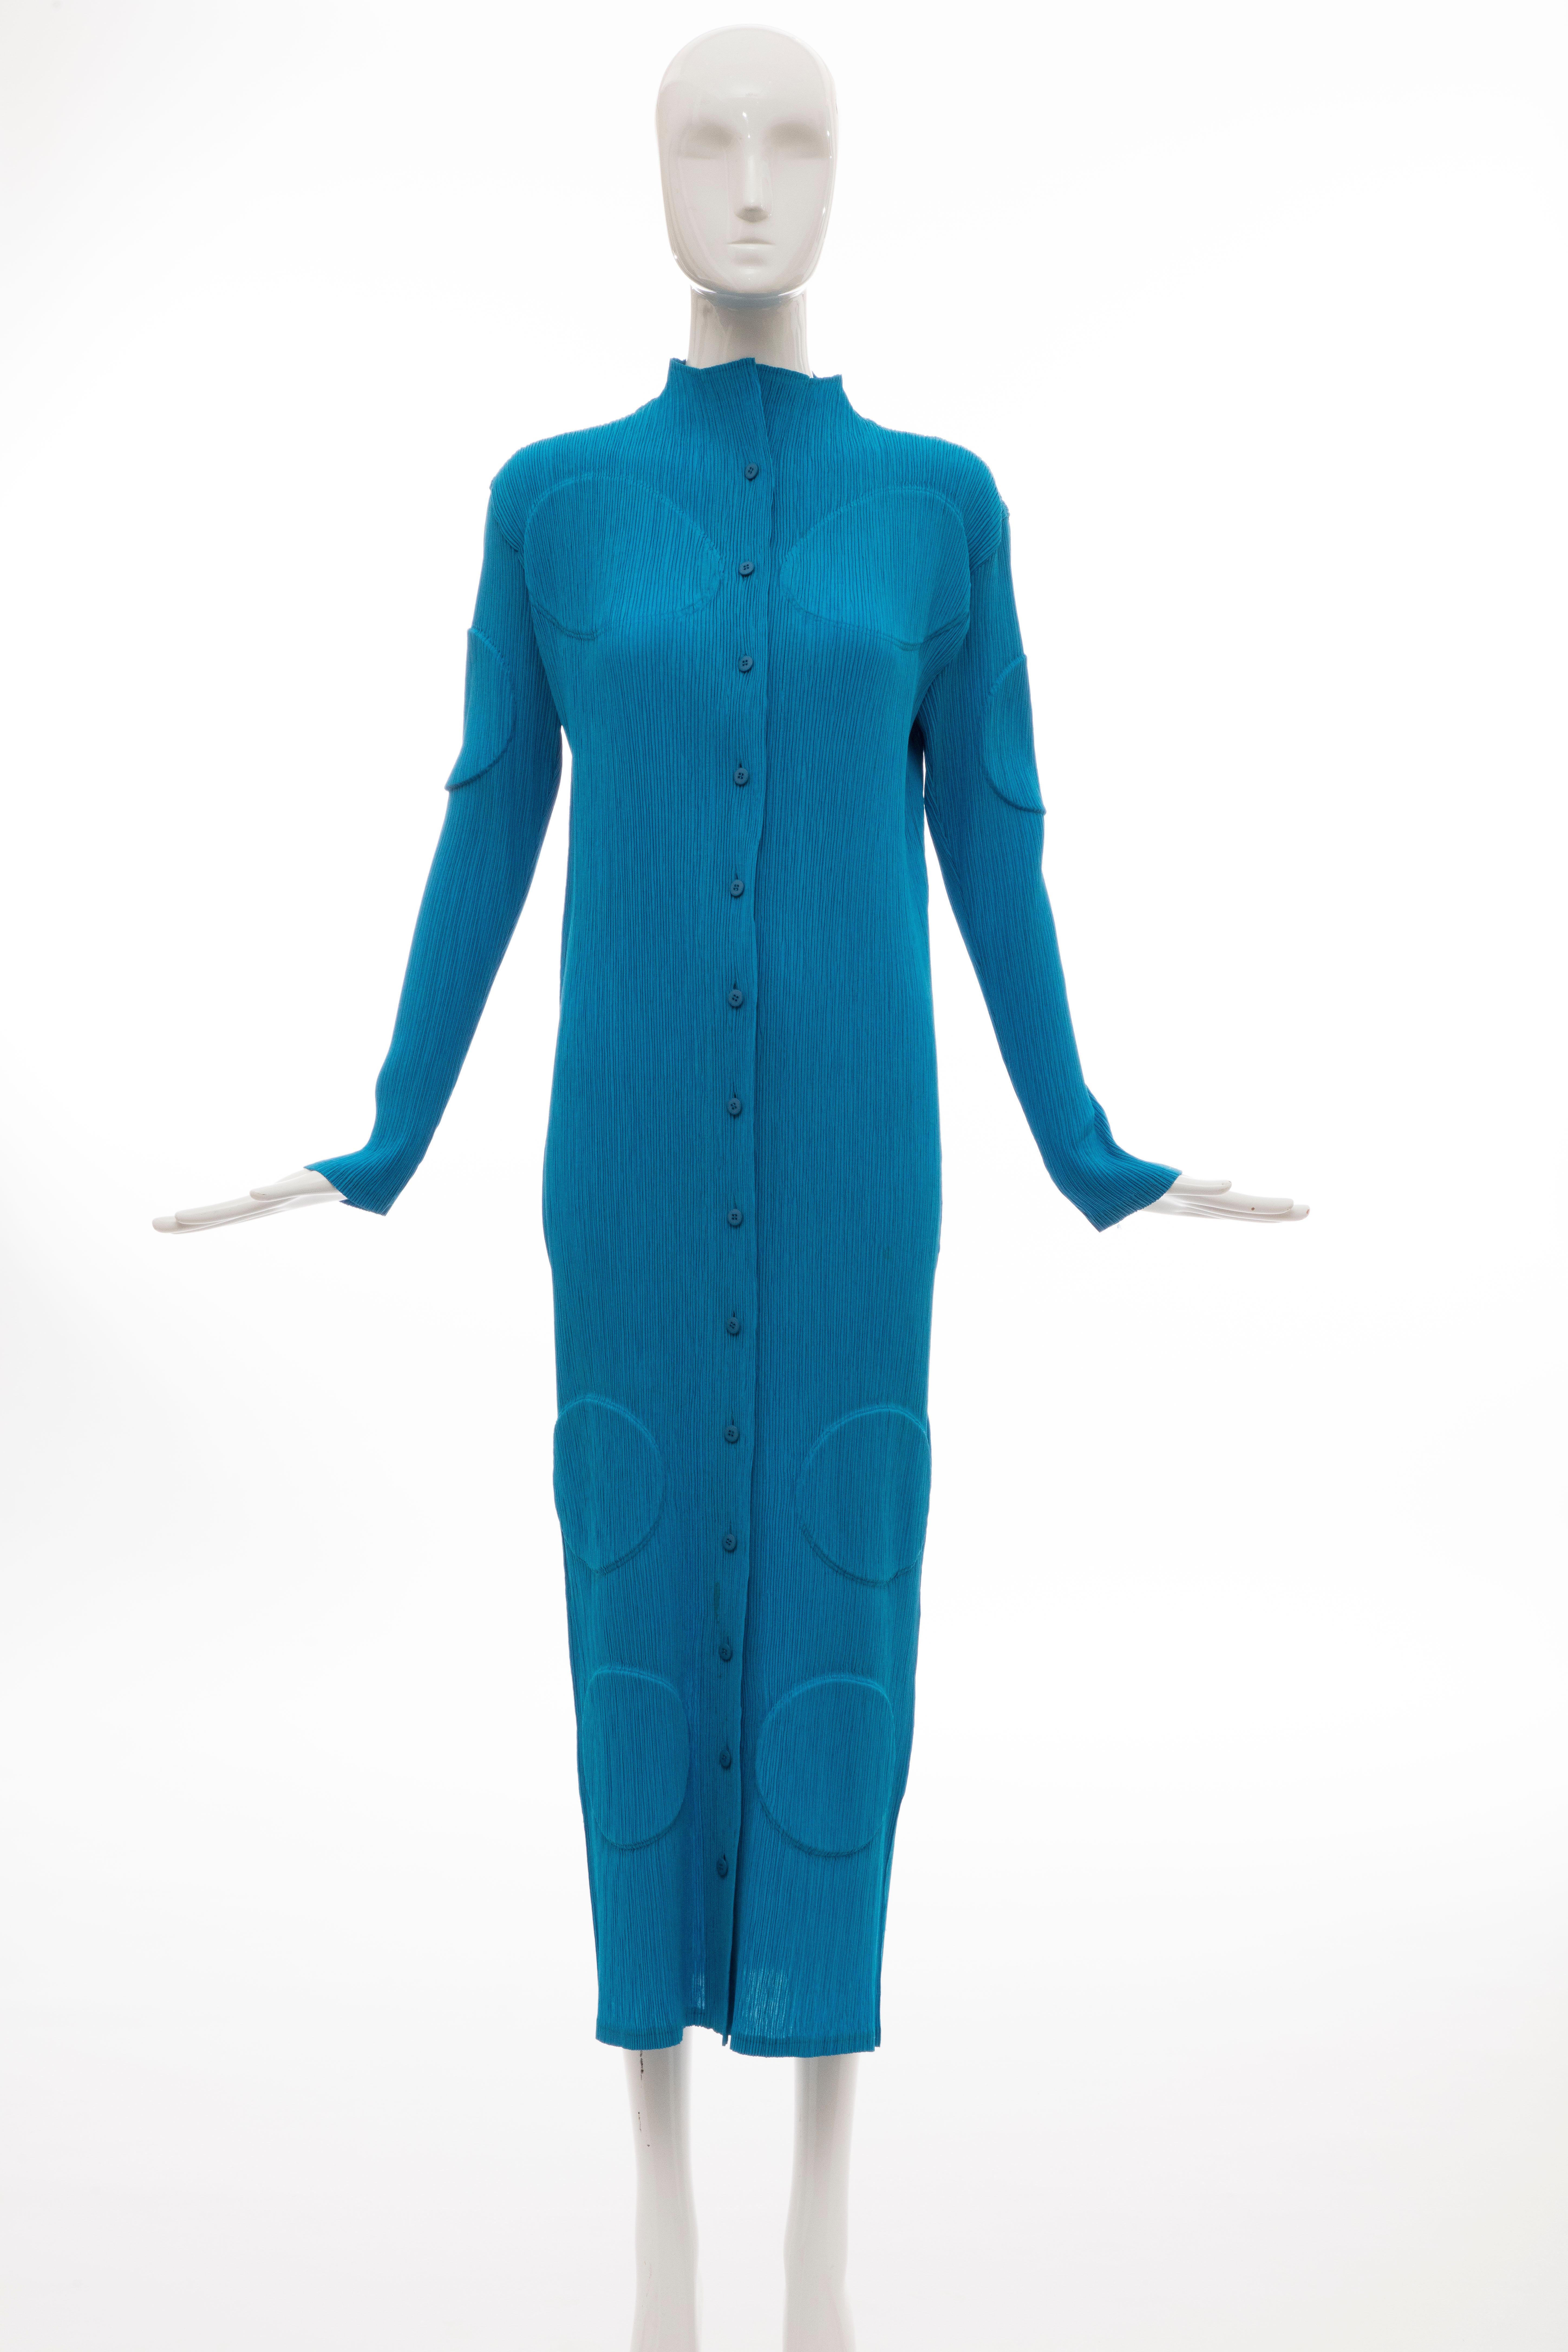 Issey Miyake, circa 1990s, turquoise long button front cardigan